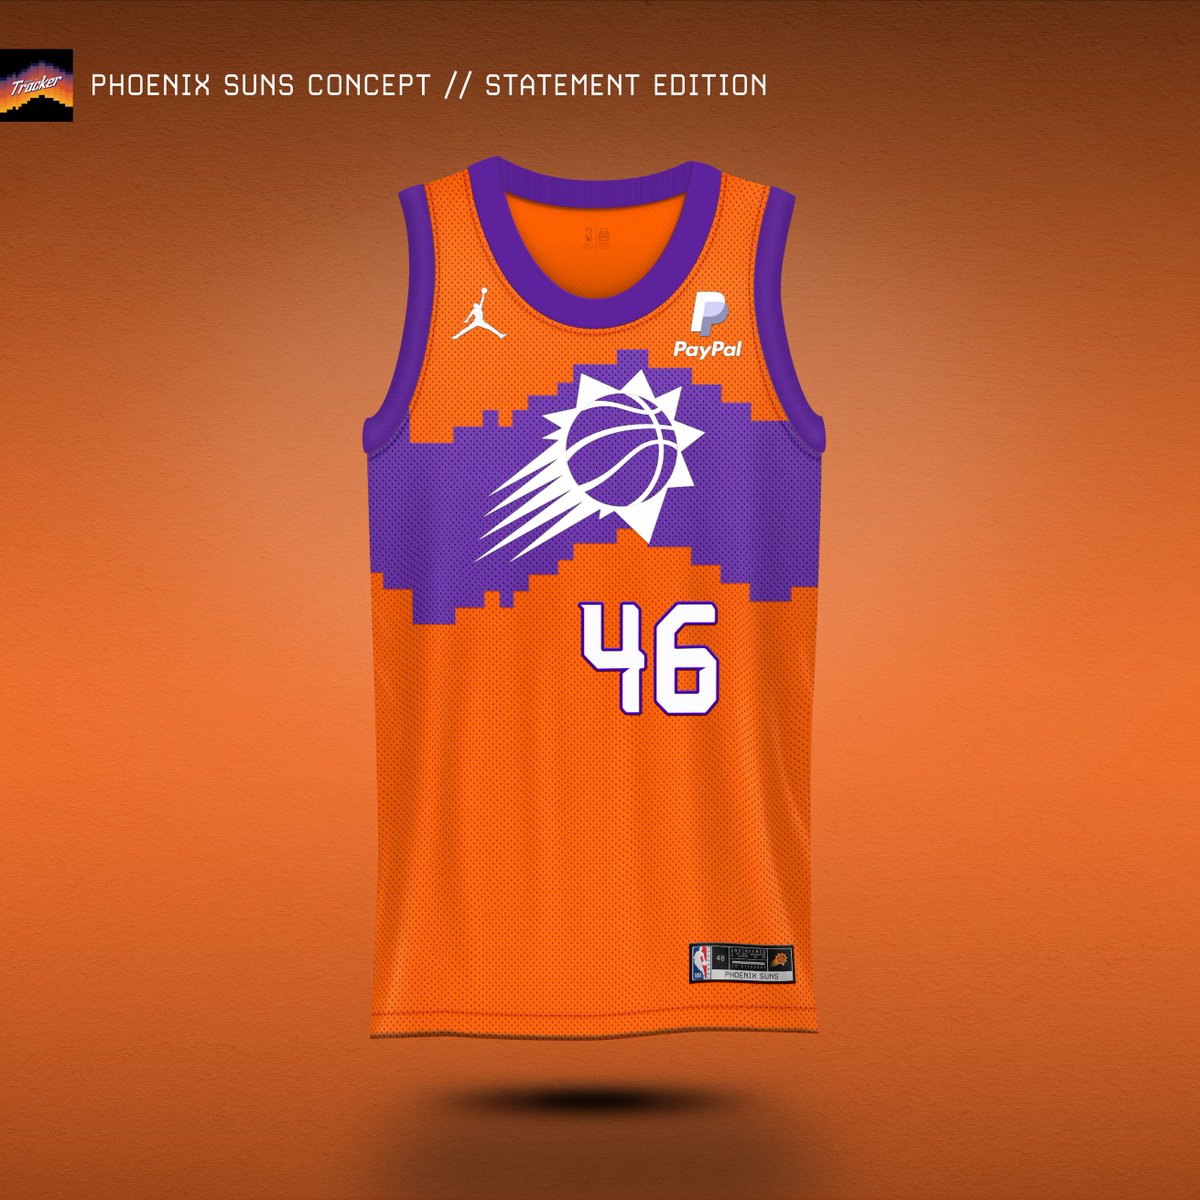 Thoughts on the Valley Jersey becoming our home and away? : r/suns